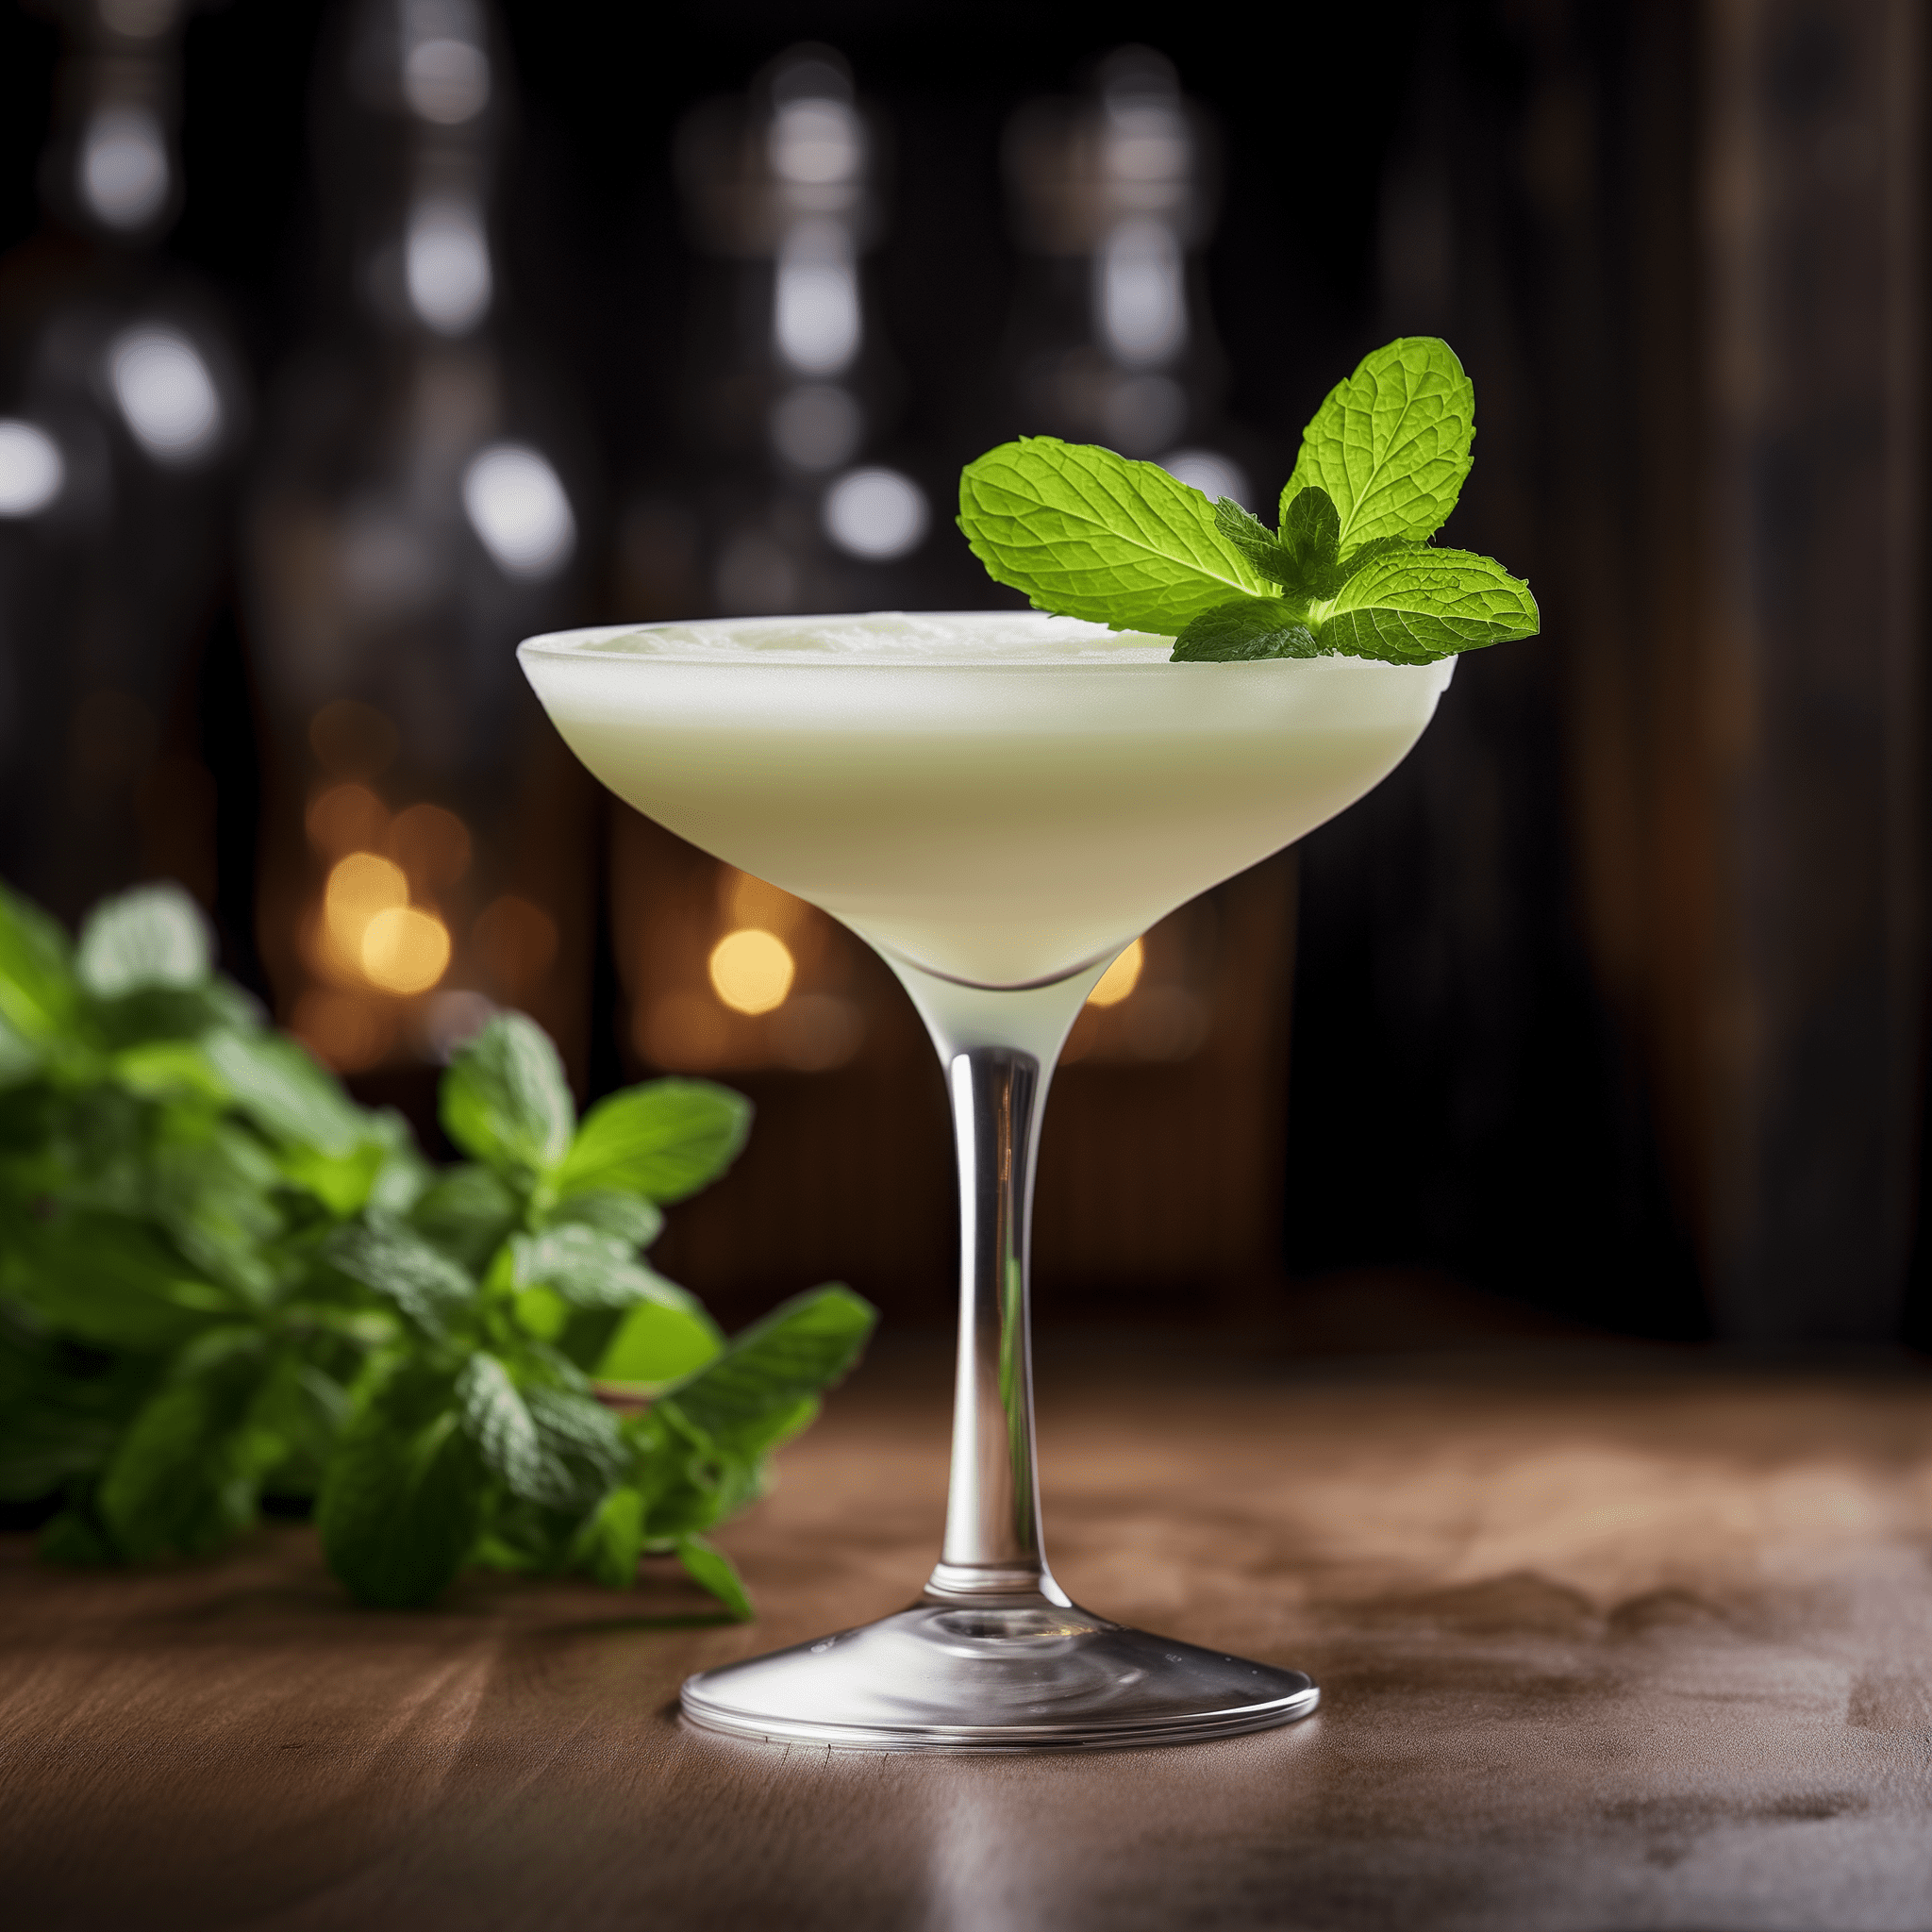 Cricket Cocktail Recipe - The Cricket cocktail offers a creamy, velvety texture with a refreshing minty kick. It's sweet without being cloying, and the chocolate notes provide a rich depth that balances the mint beautifully. The cream adds a luxurious feel, making it a rich and indulgent treat.